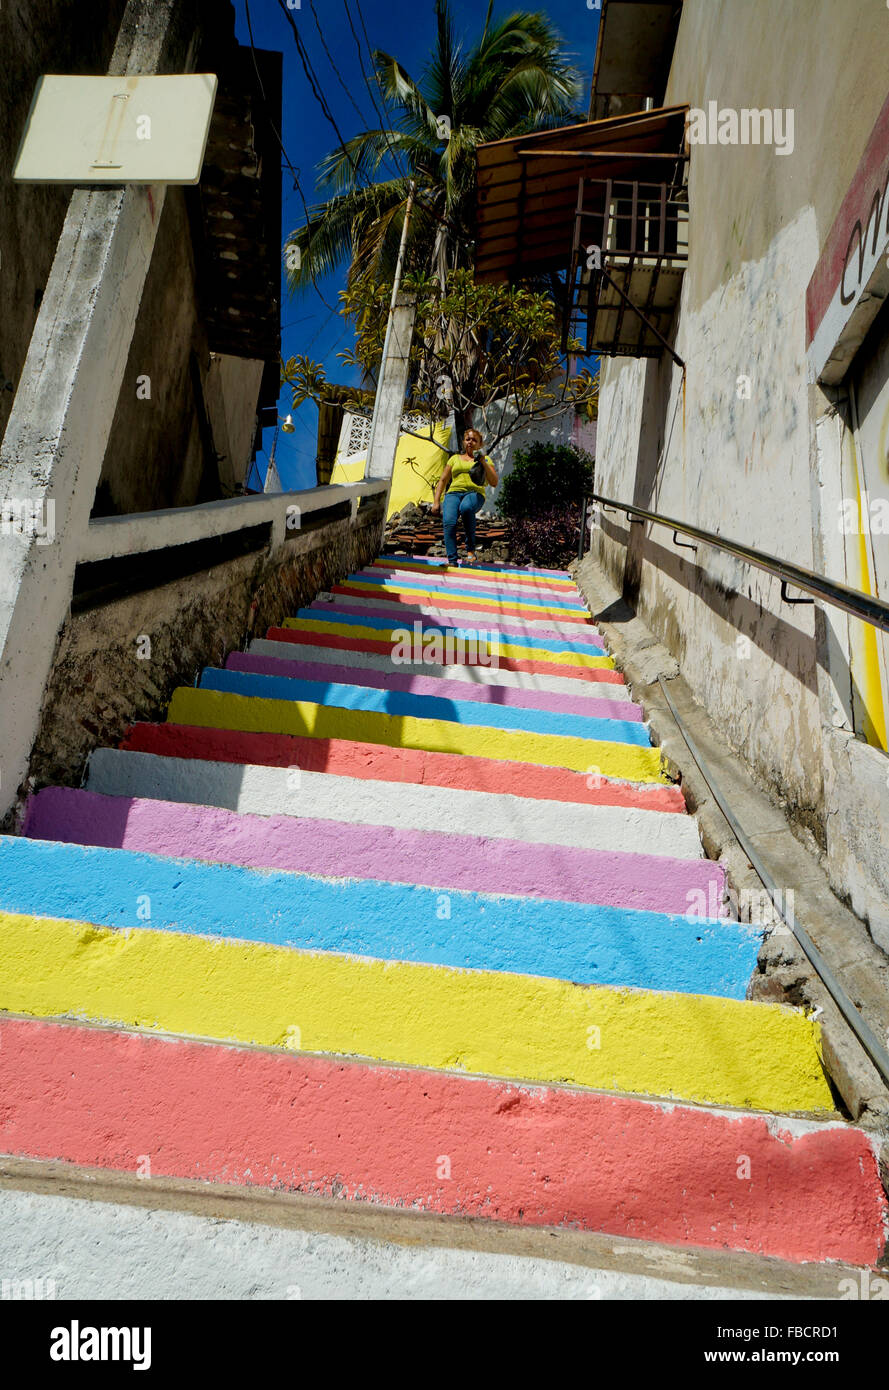 Woman walking down painted stairs in Acapulco, Mexico Stock Photo